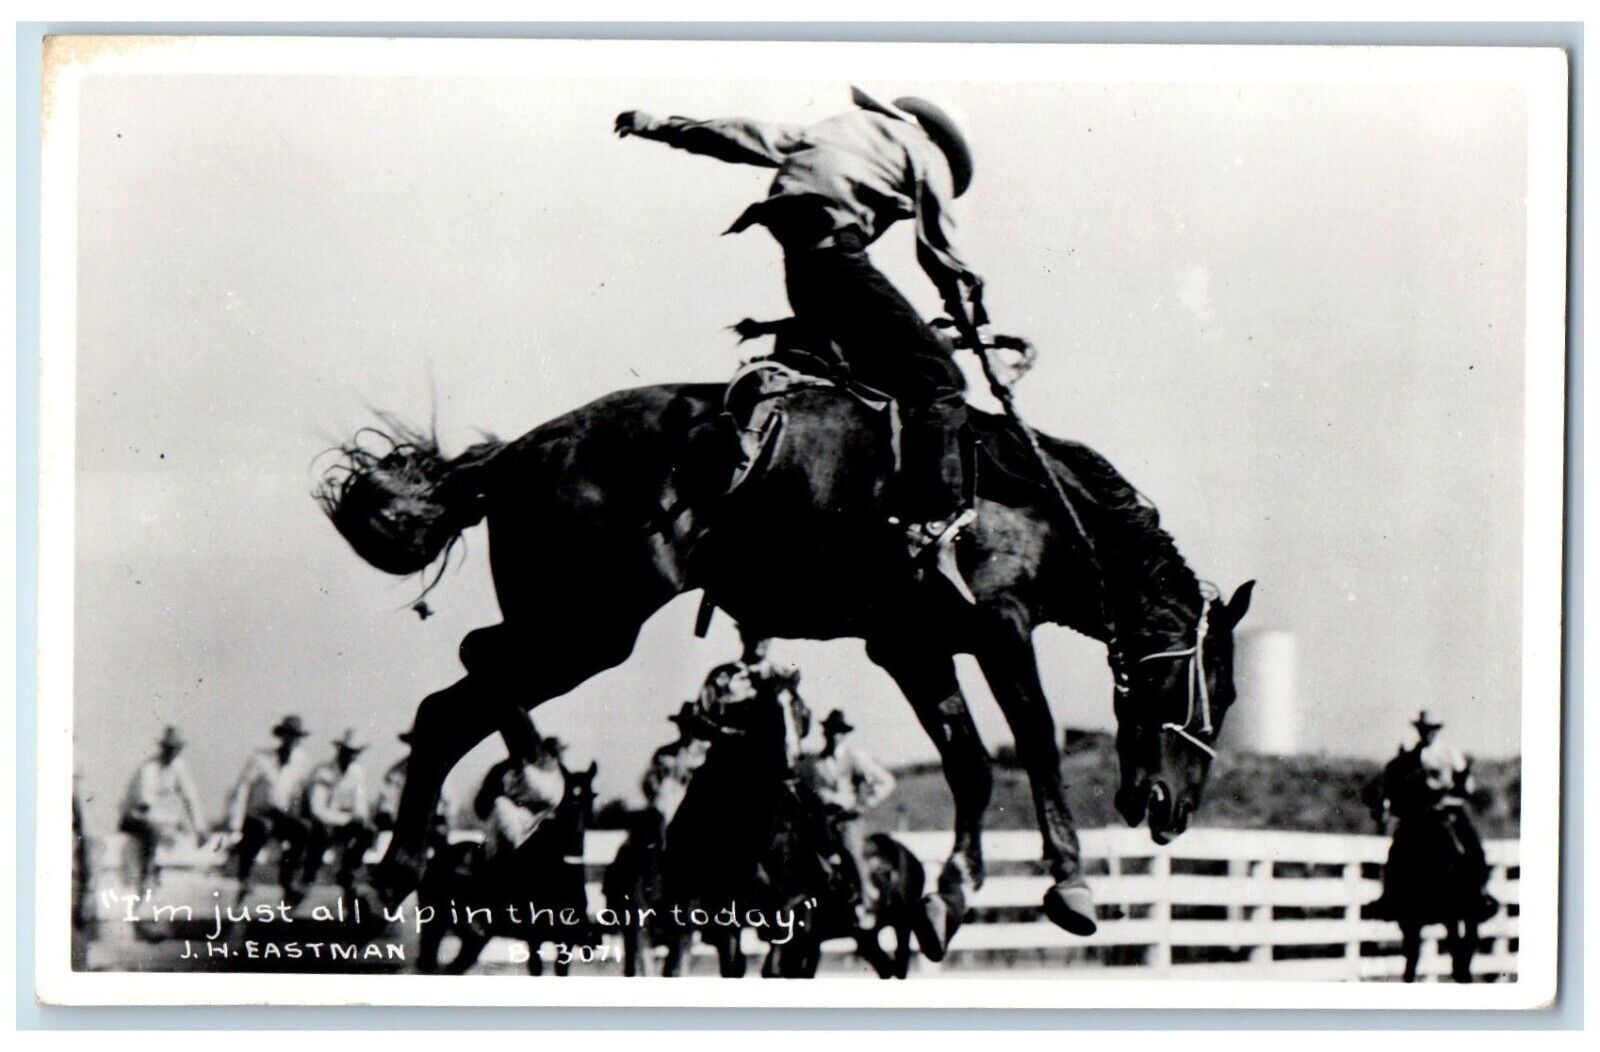 Rodeo Postcard RPPC Photo I\'m Just All Up In The Air Today Eastman c1940\'s